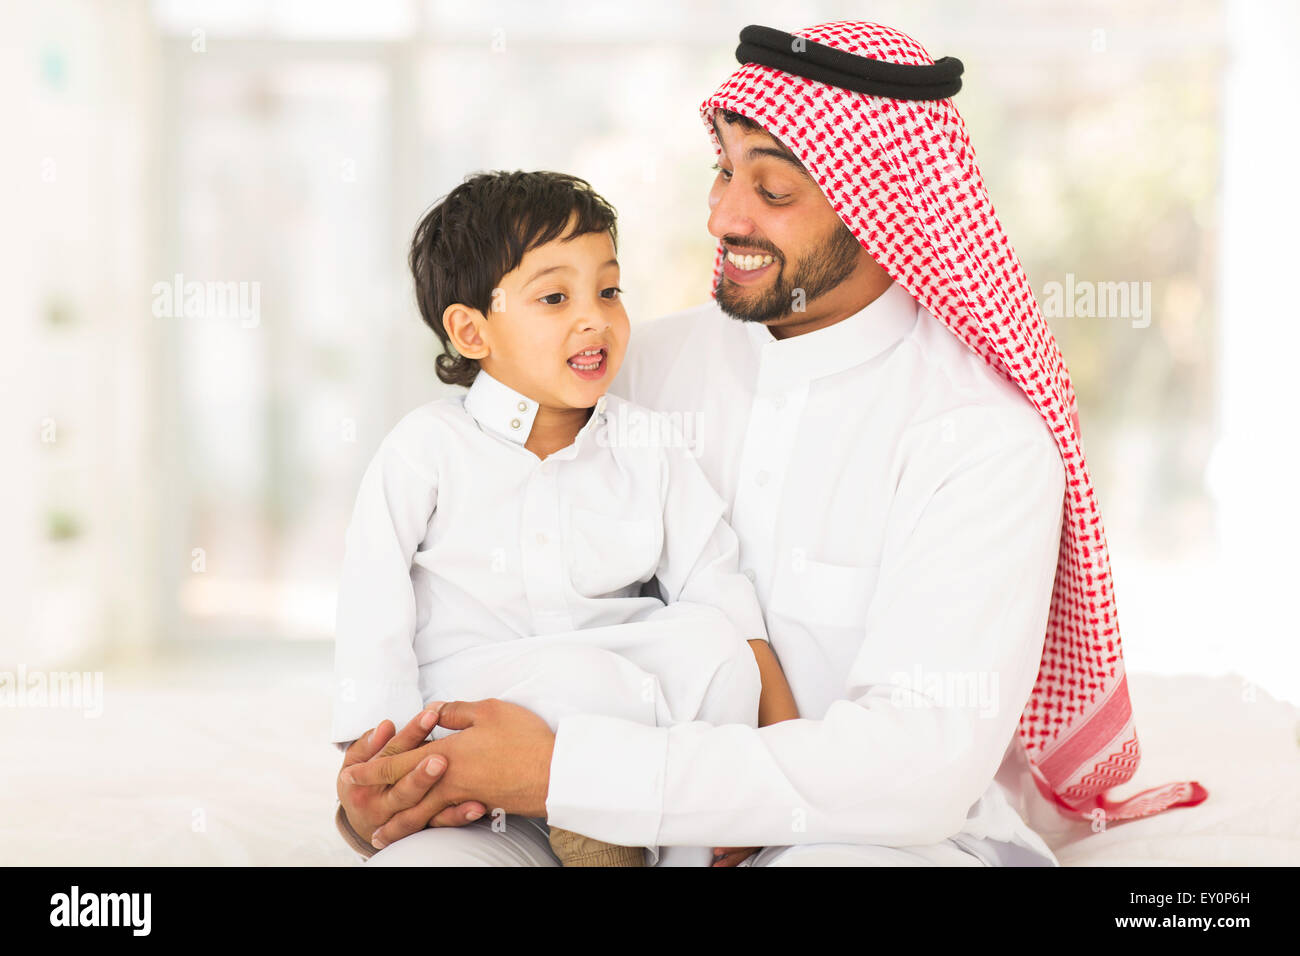 lovely Arabic man talking to his son Stock Photo